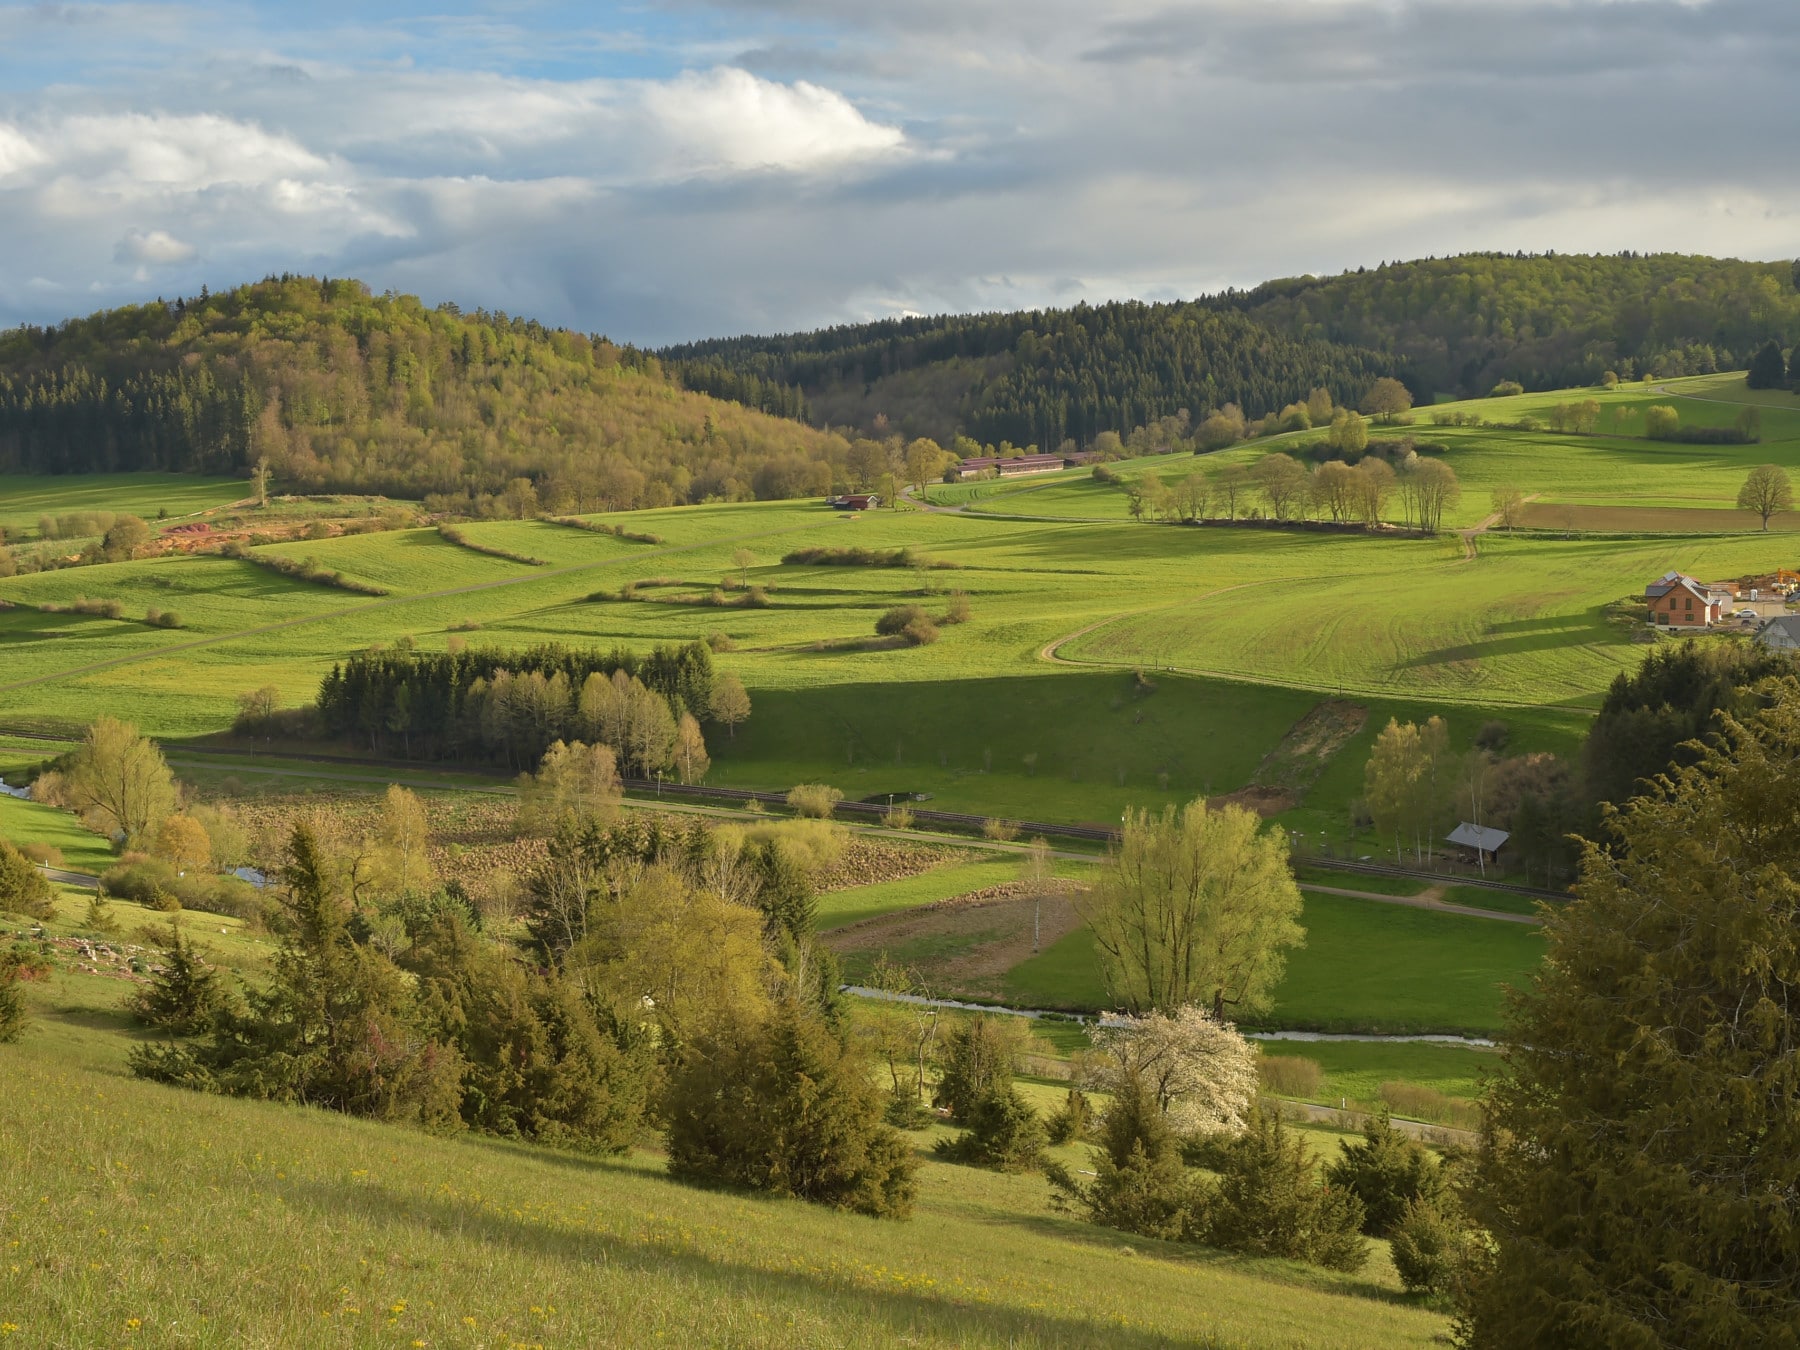 Picture: The photo is taken from a hill and shows the landscape of the Swabian Alb in springtime with the sun low in the sky. In the foreground and middle ground there are meadows with single trees and with groups of trees. In the background there are hills forested with foliage and with conifers.